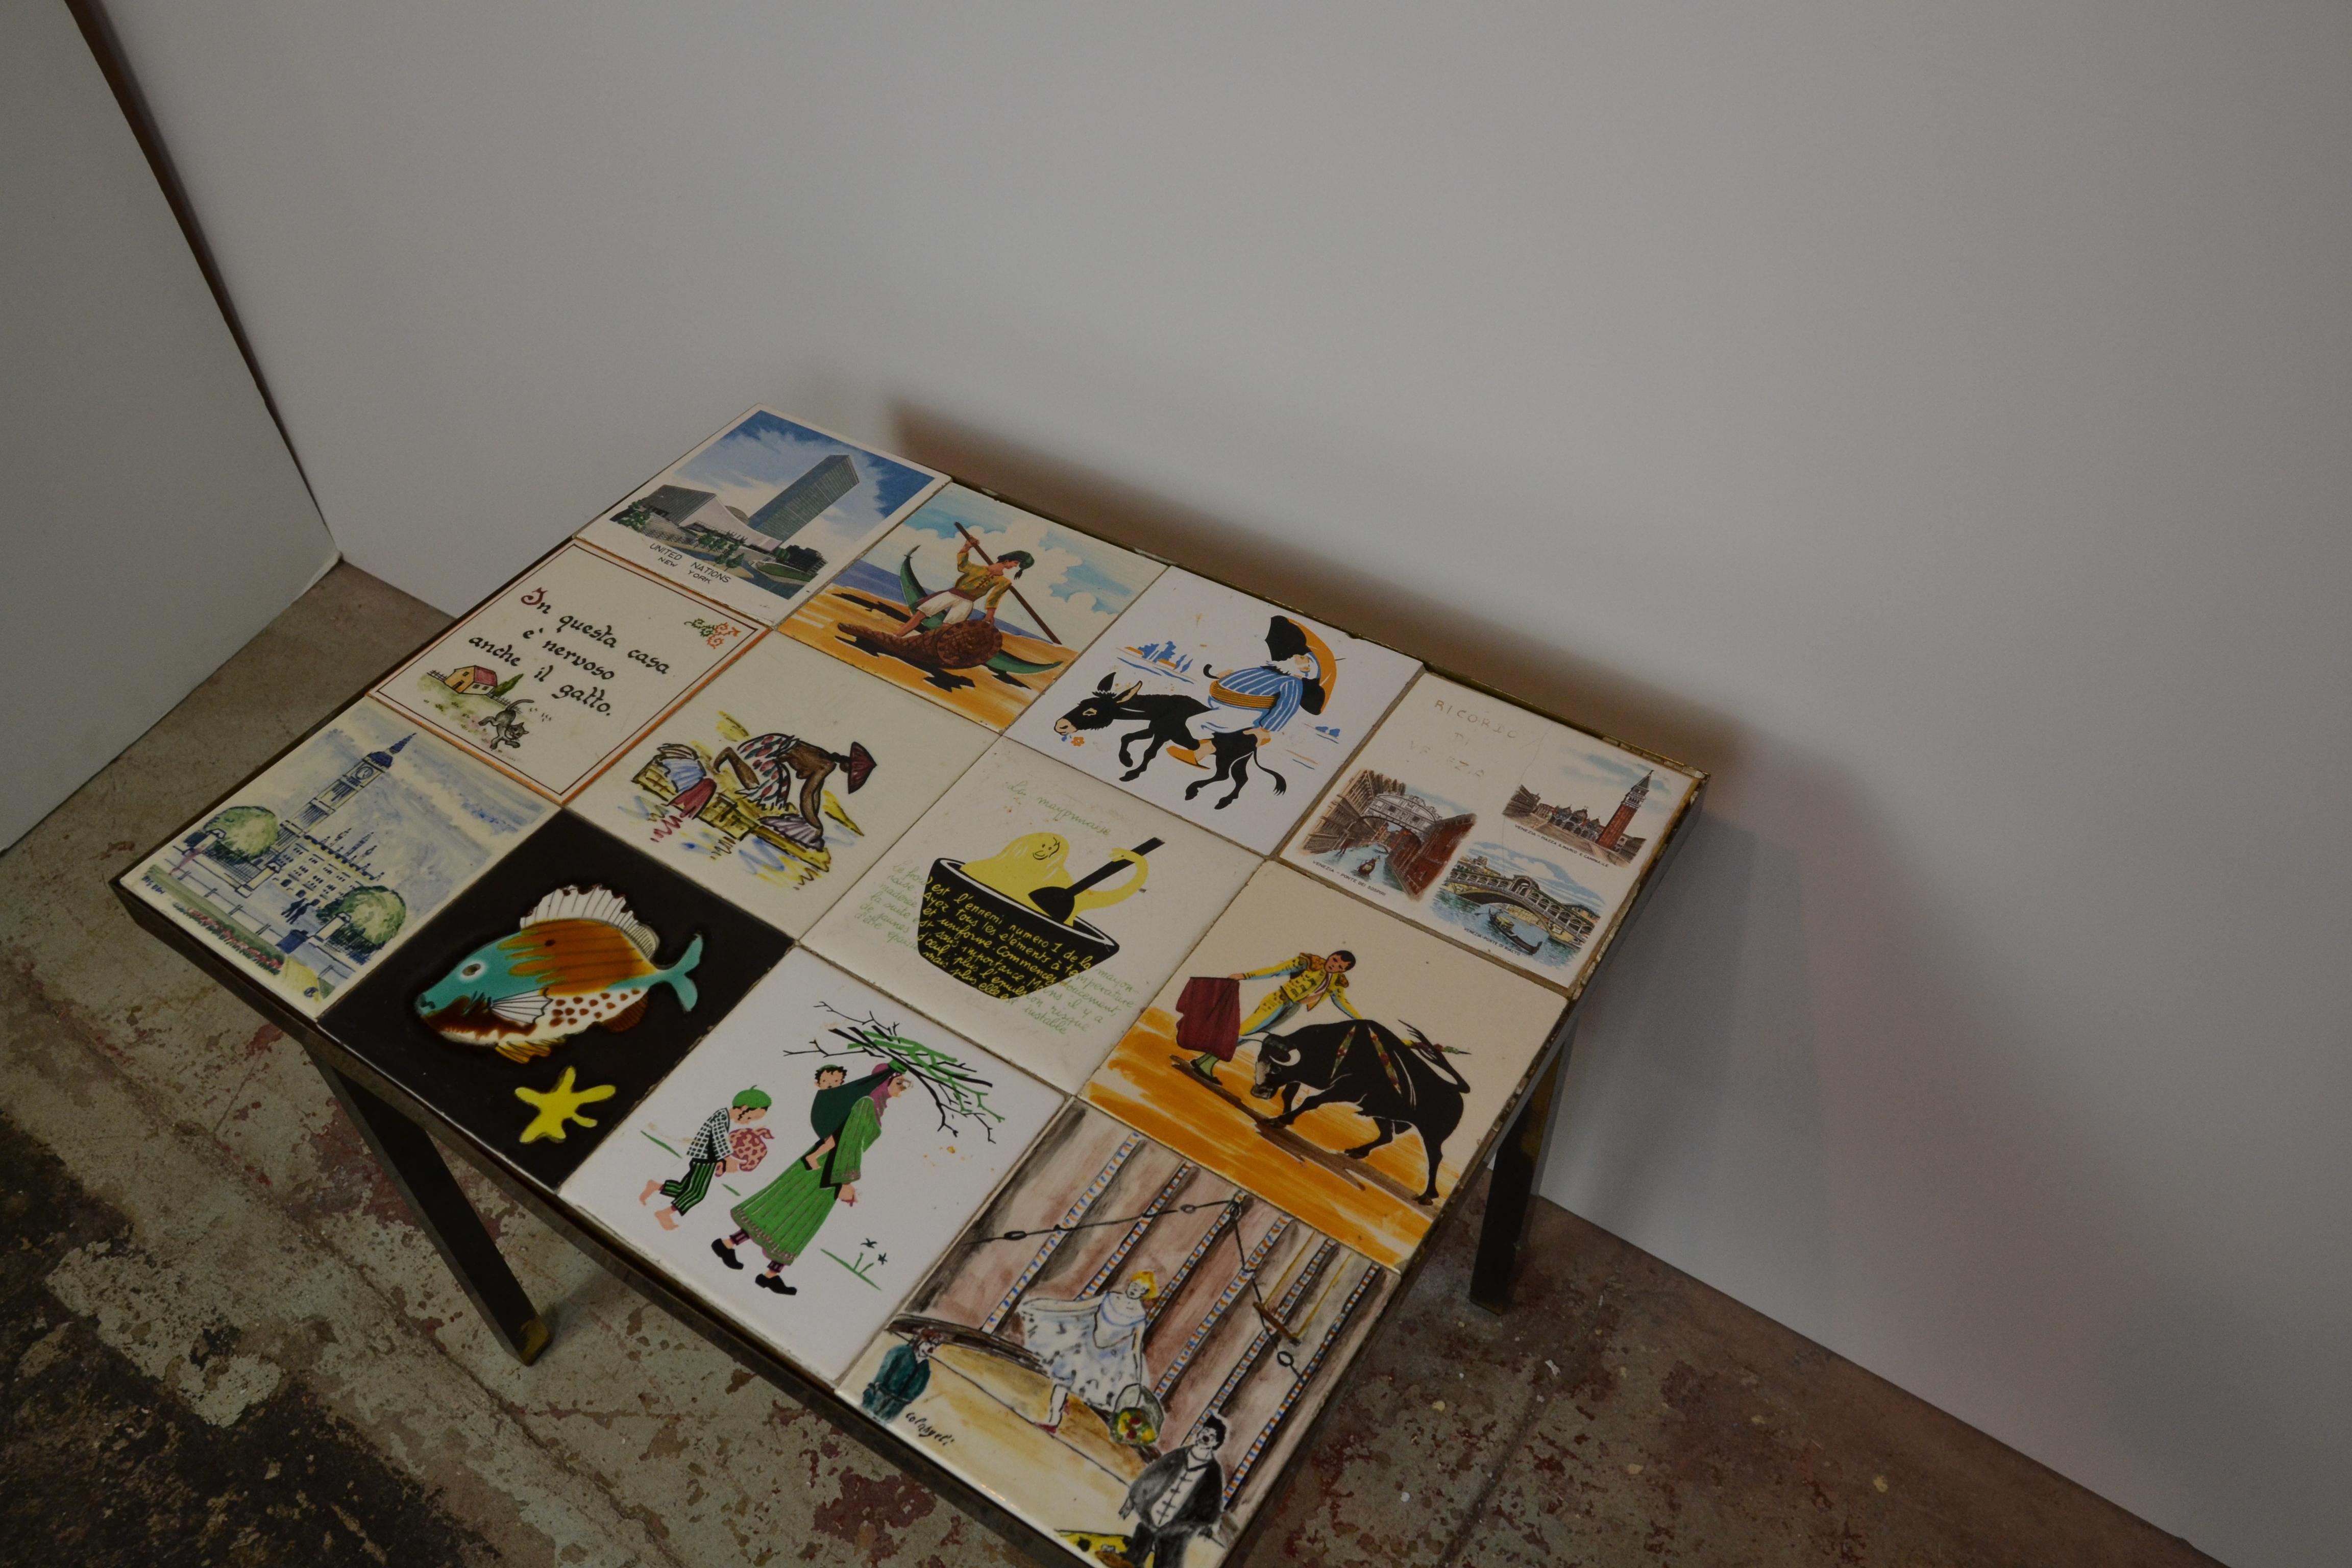 A midcentury tile-top table on an iron-leg base. The table features picture tiles with scenes from around the world.